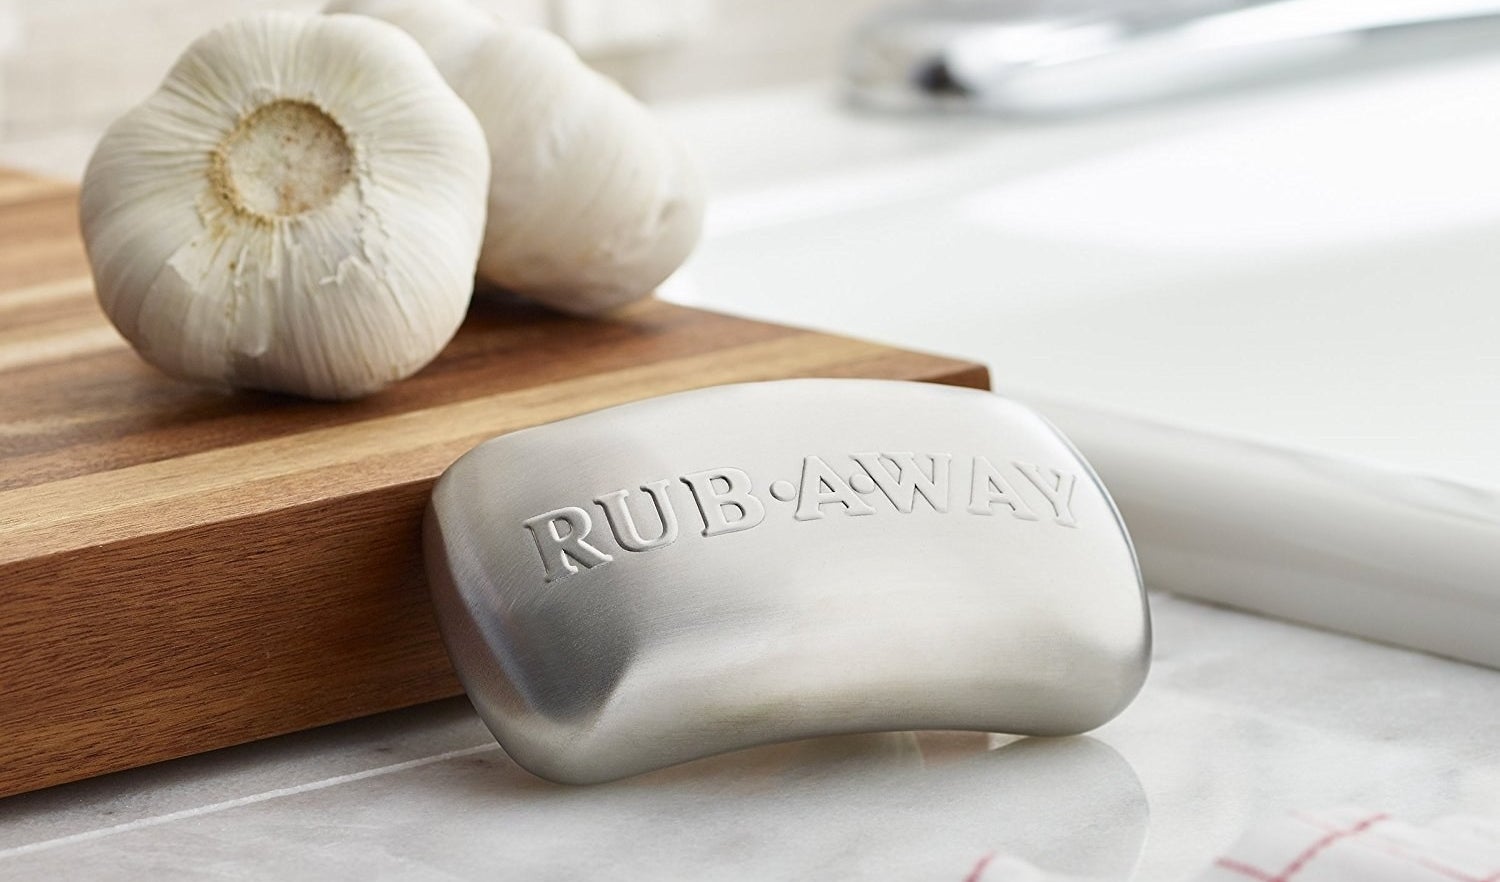 The soap bar-shaped stainless steel, with the text "rub away" on it